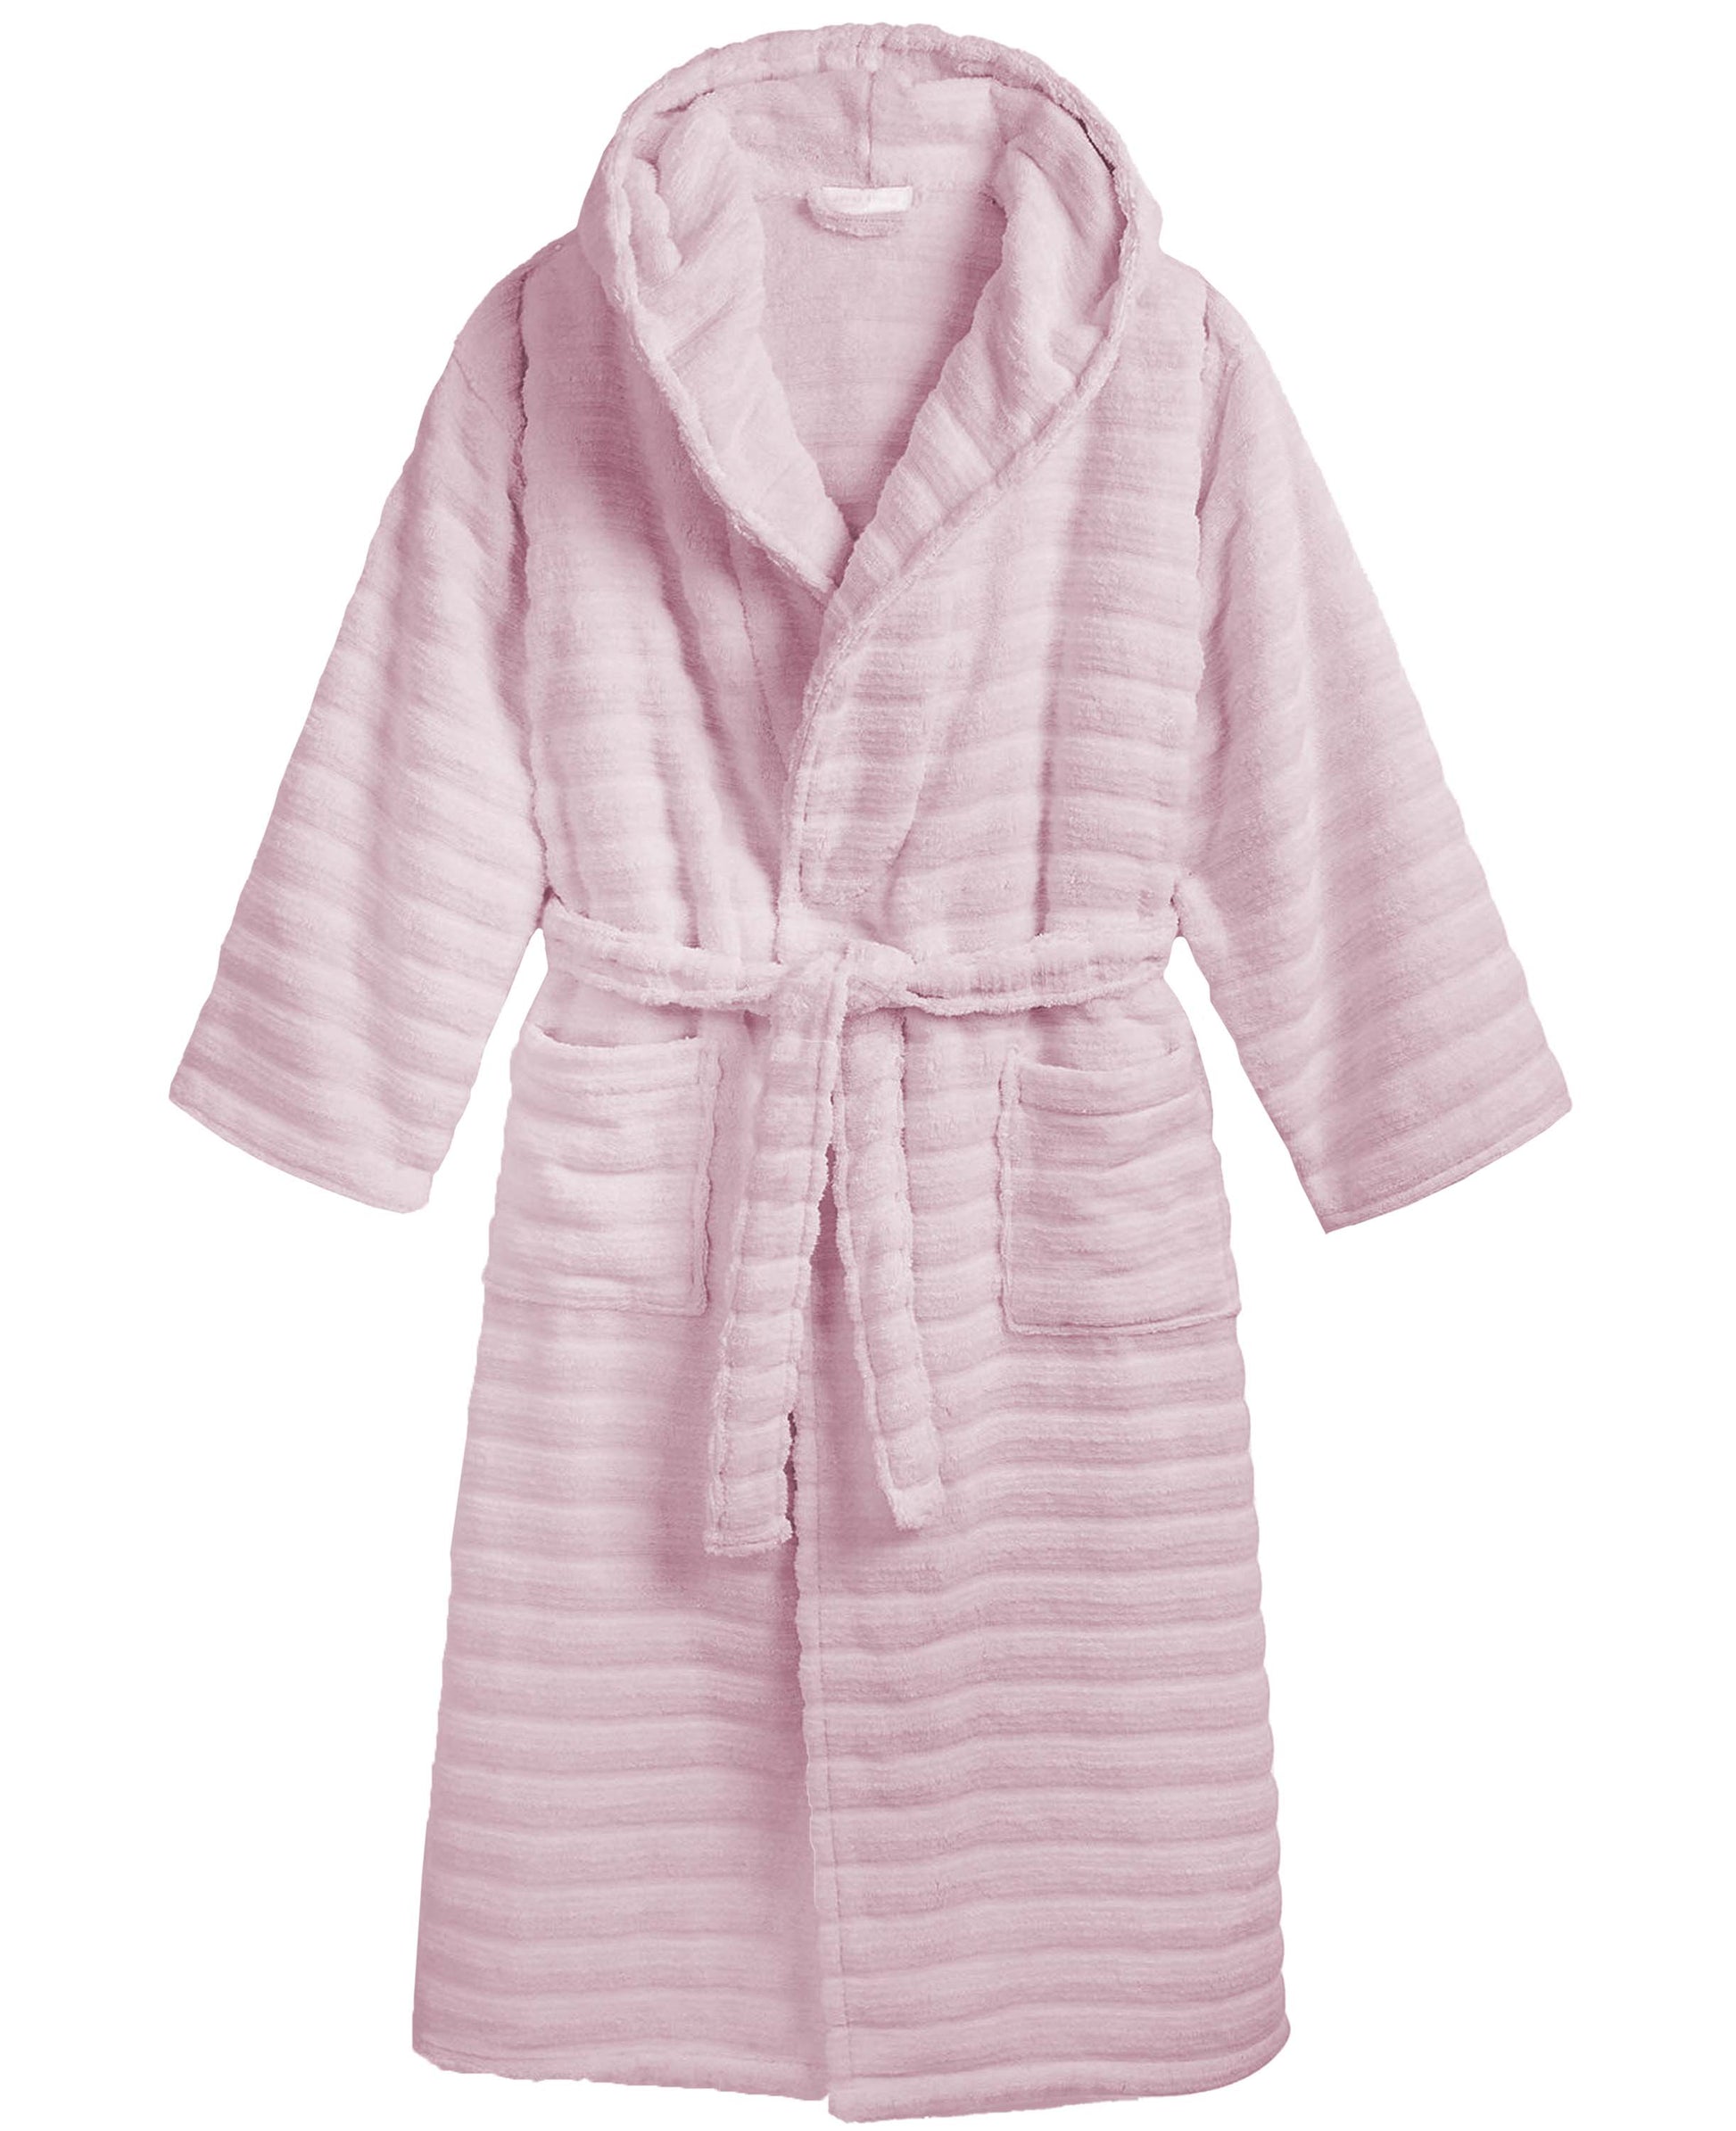 PREMIUM RIBBED TOWELING DRESSING GOWN: 100% COTTON-Striped & Ribbed Terry Toweling Hooded Bathrobe-Weave Essentials-Pastel Pink-S/M-Weave Essentials